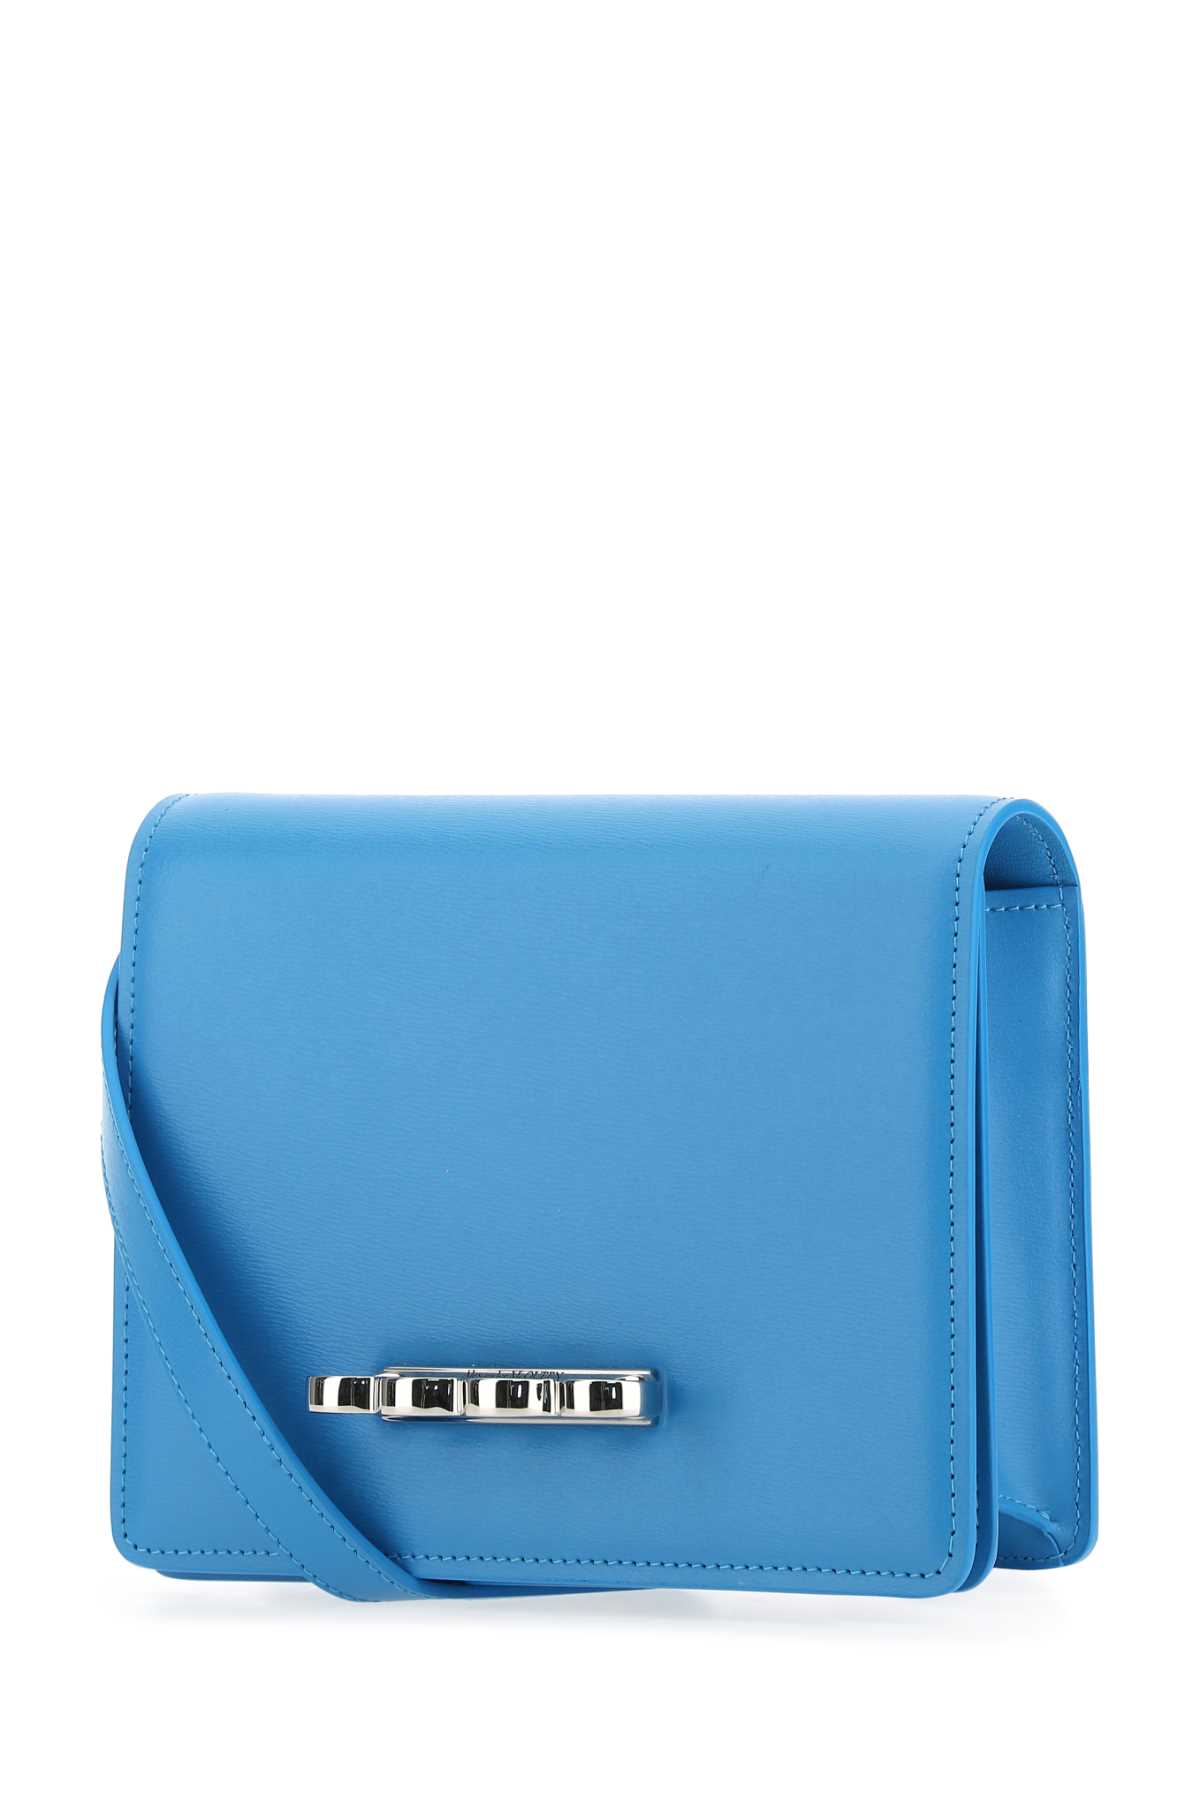 Alexander Mcqueen Light-blue Leather The Four Ring Clutch In 4722